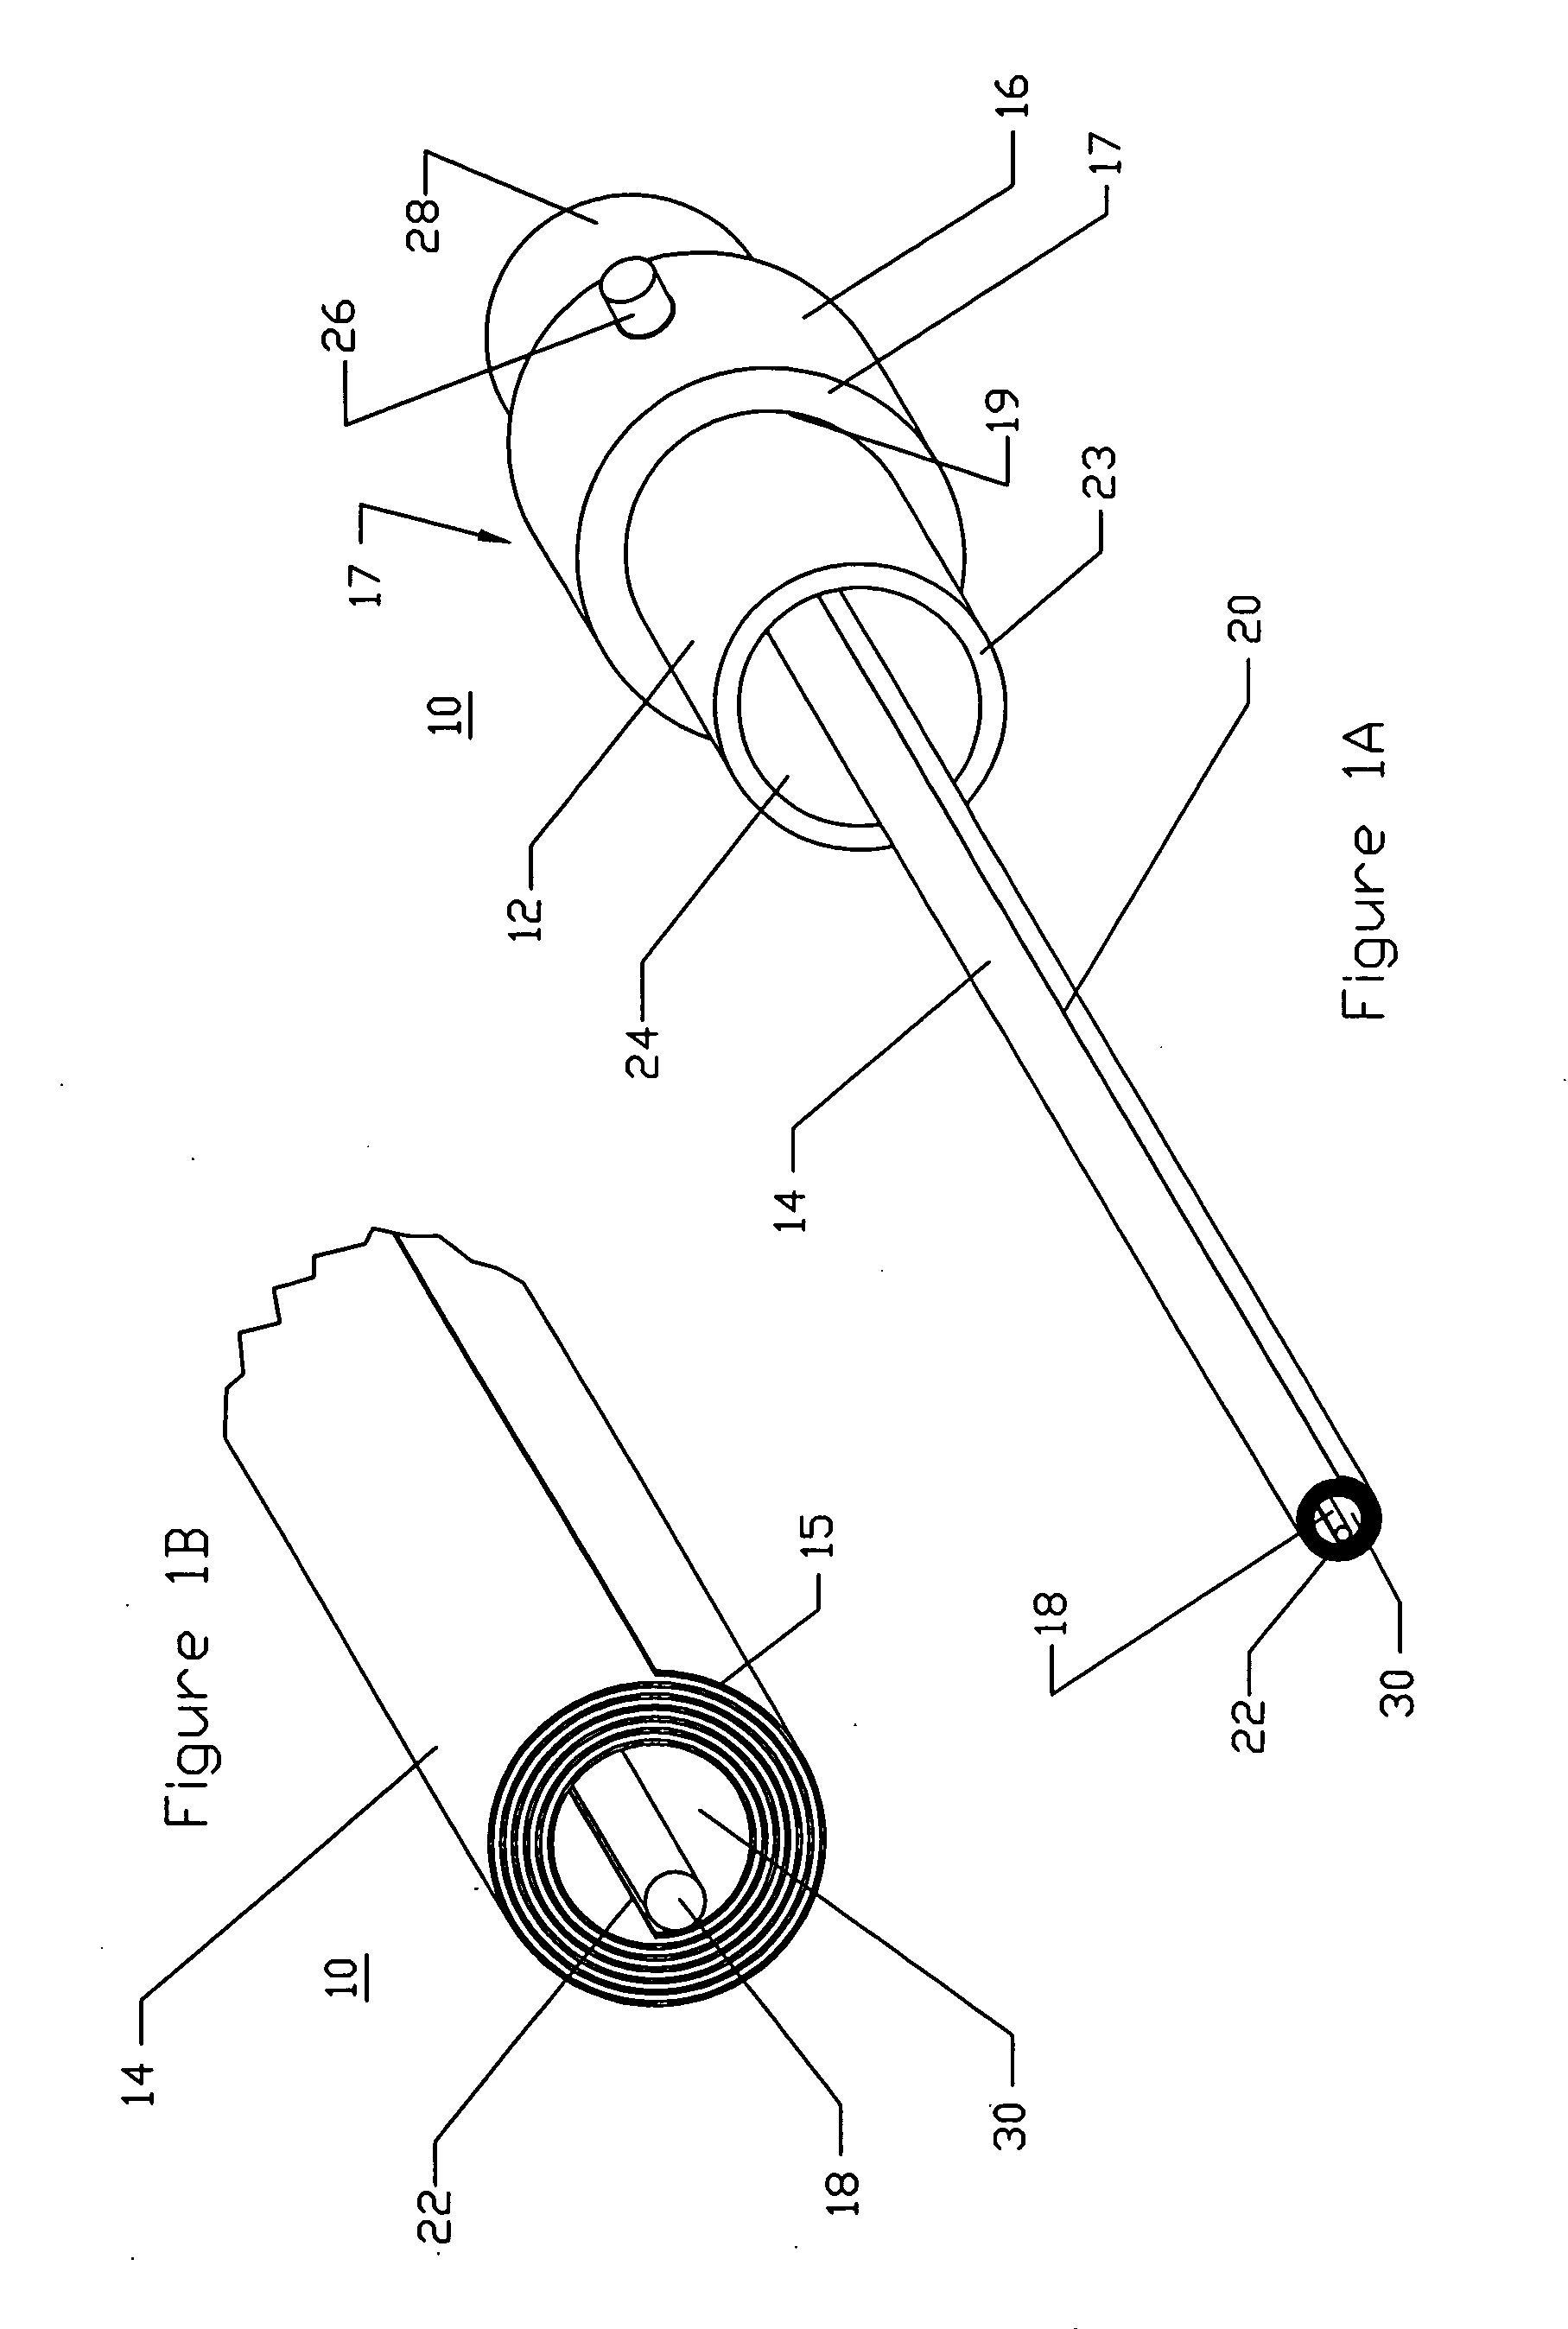 Expandable medical access device